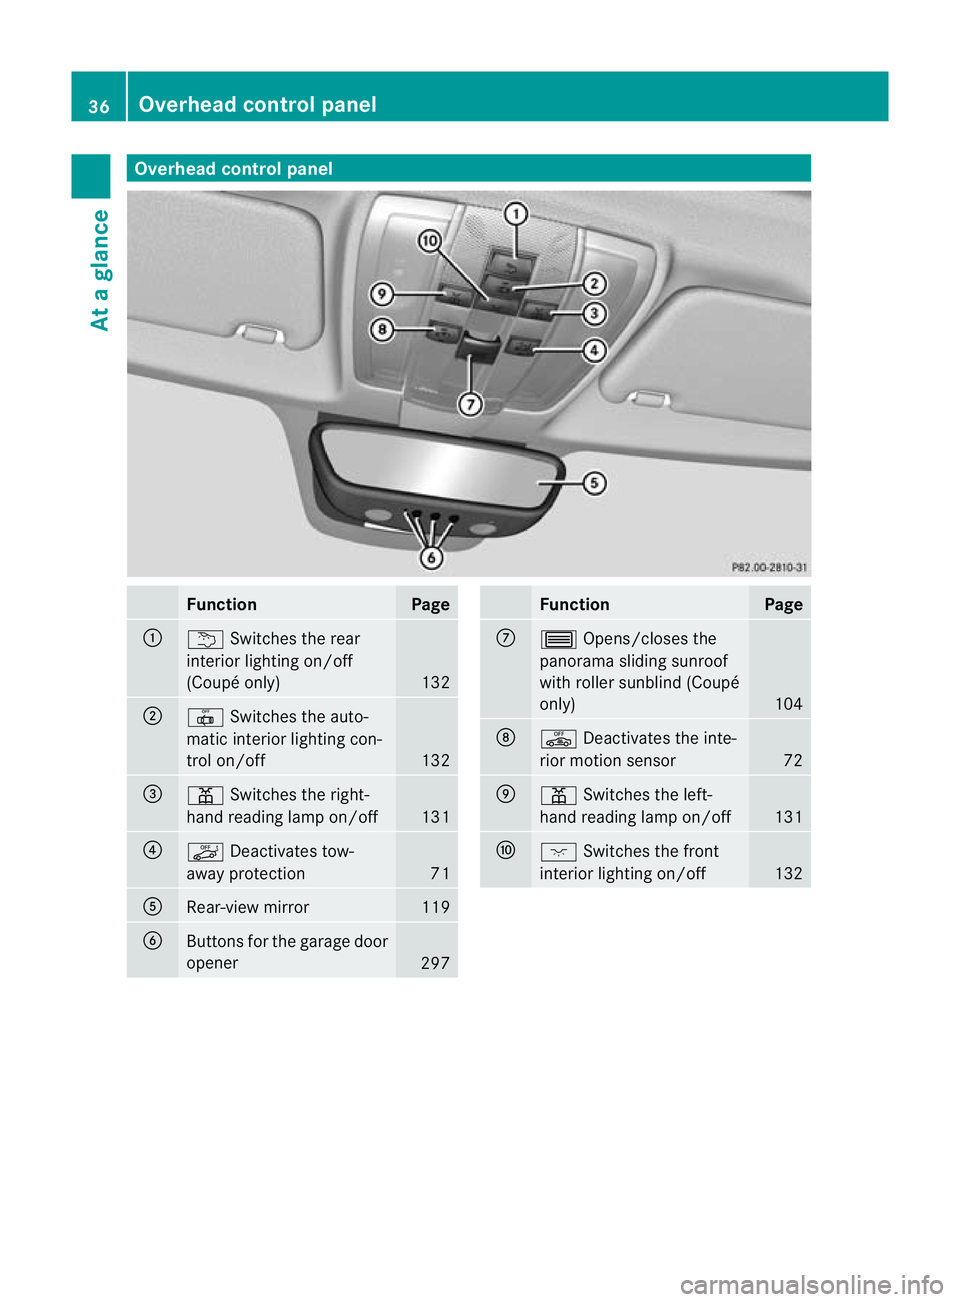 MERCEDES-BENZ E-CLASS CABRIOLET 2012  Owners Manual Overhea
dcontrol panel Function Page
:
u
Switches the rear
interio rlighting on/off
(Coupé only) 132
;
|
Switches the auto-
matic interior lighting con-
trol on/off 132
=
p
Switches the right-
hand r